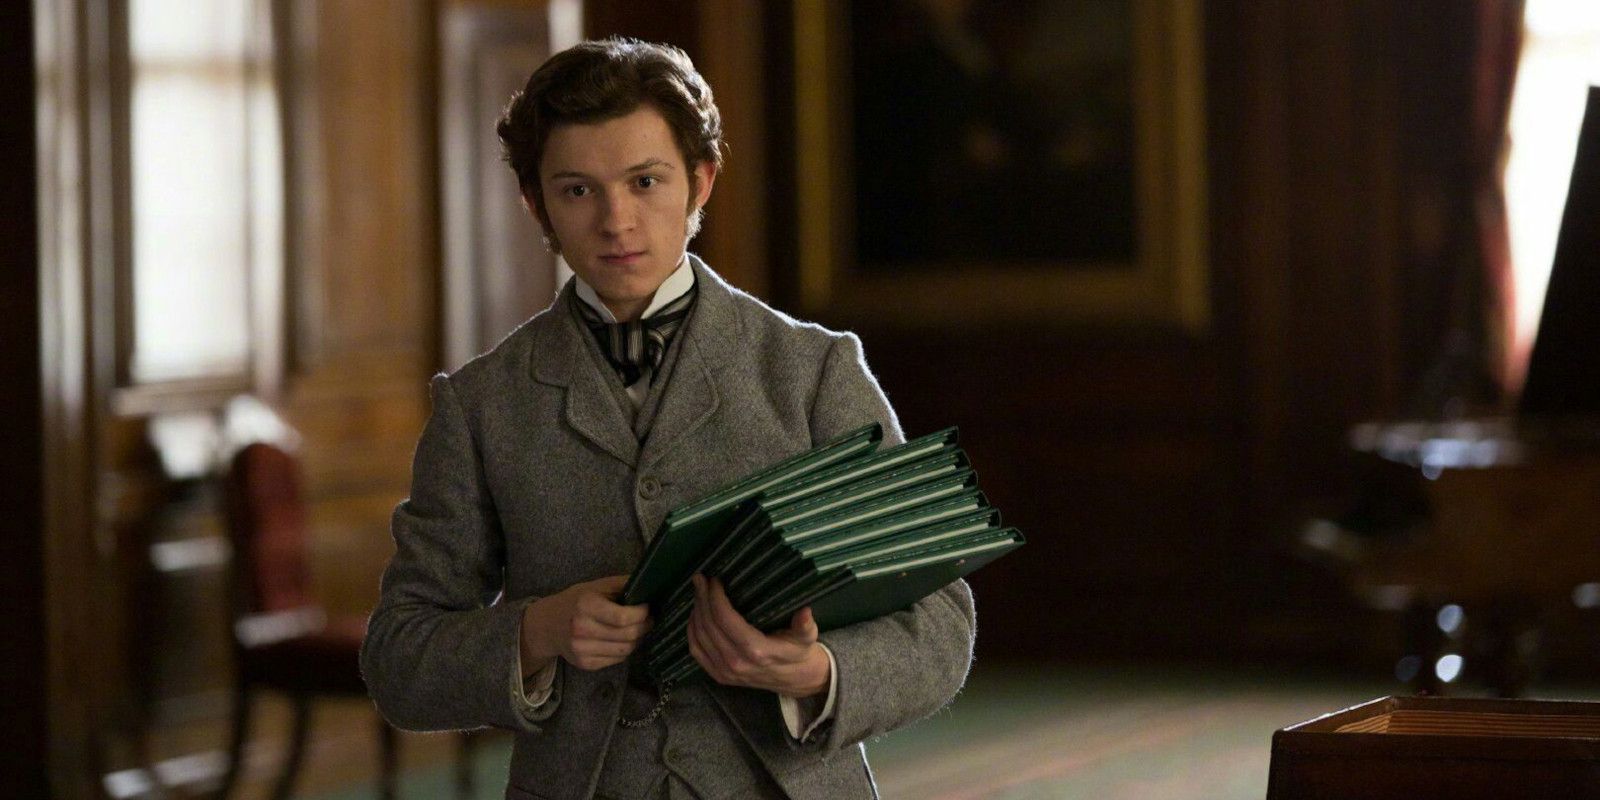 tom holland as samuel insull in the current war